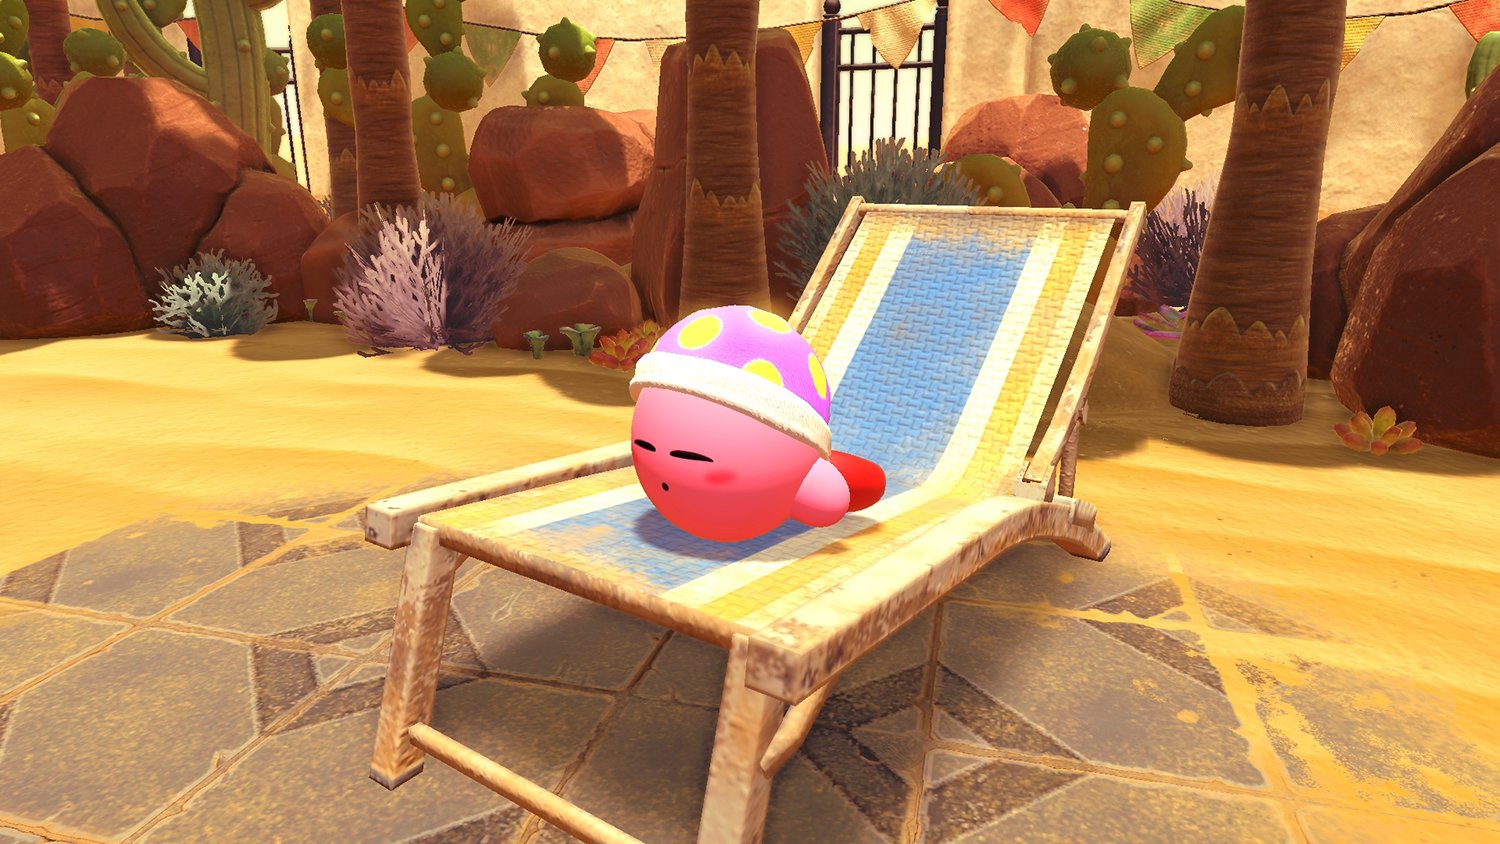 Kirby sleeps on a lounge chair in Kirby and the Forgotten Land on Nintendo Switch